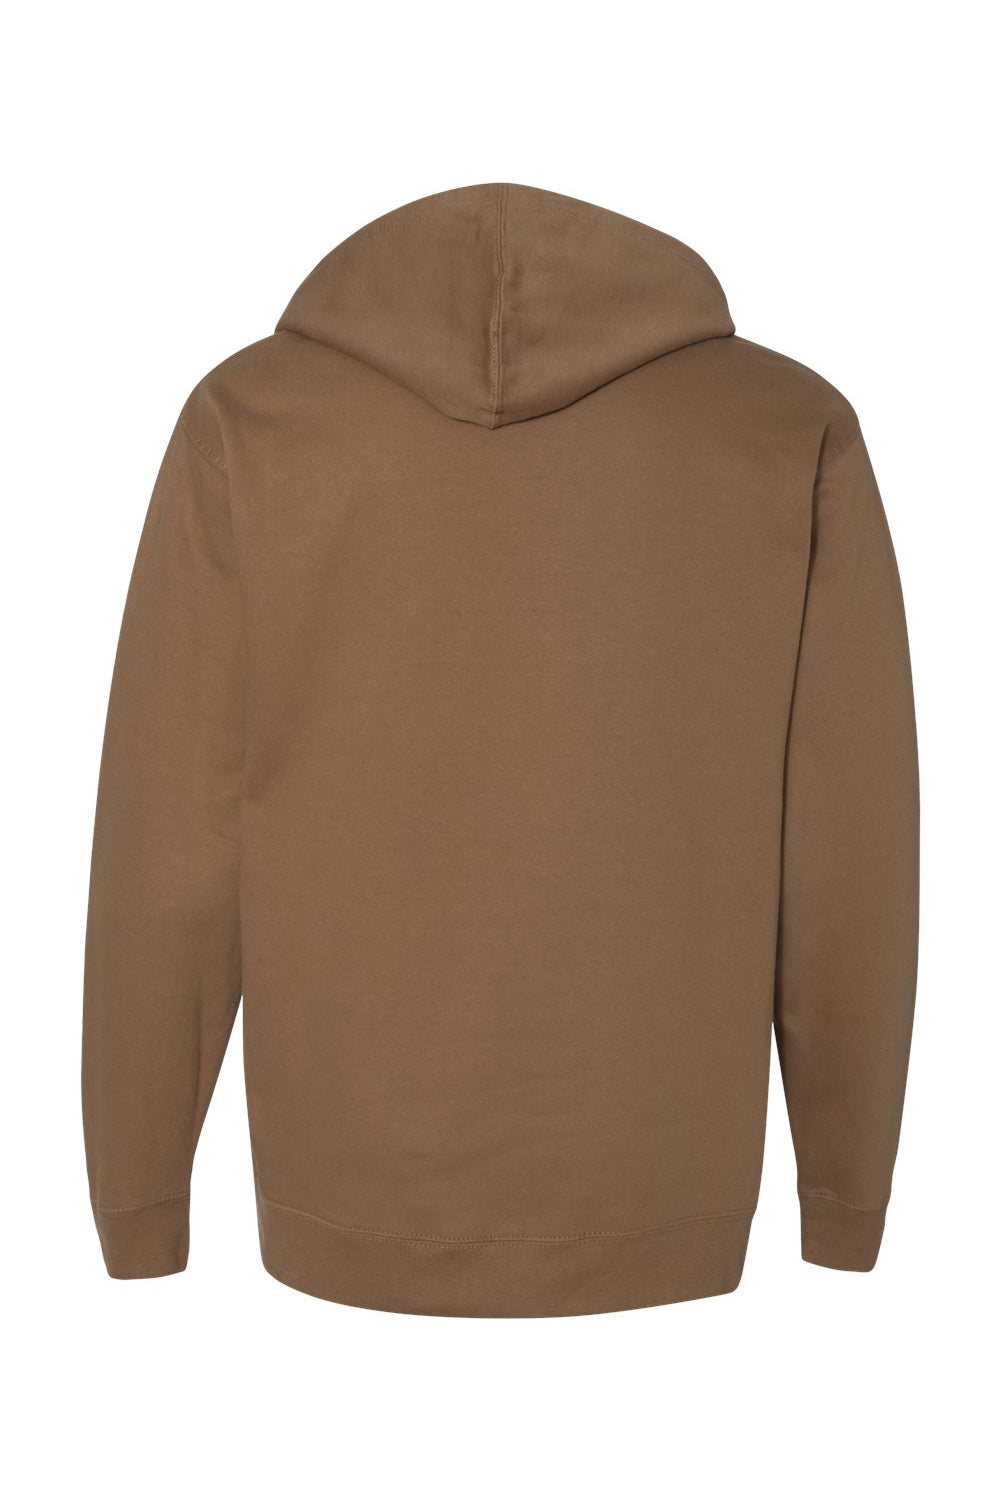 Independent Trading Co. SS4500 Mens Hooded Sweatshirt Hoodie Saddle Brown Flat Back